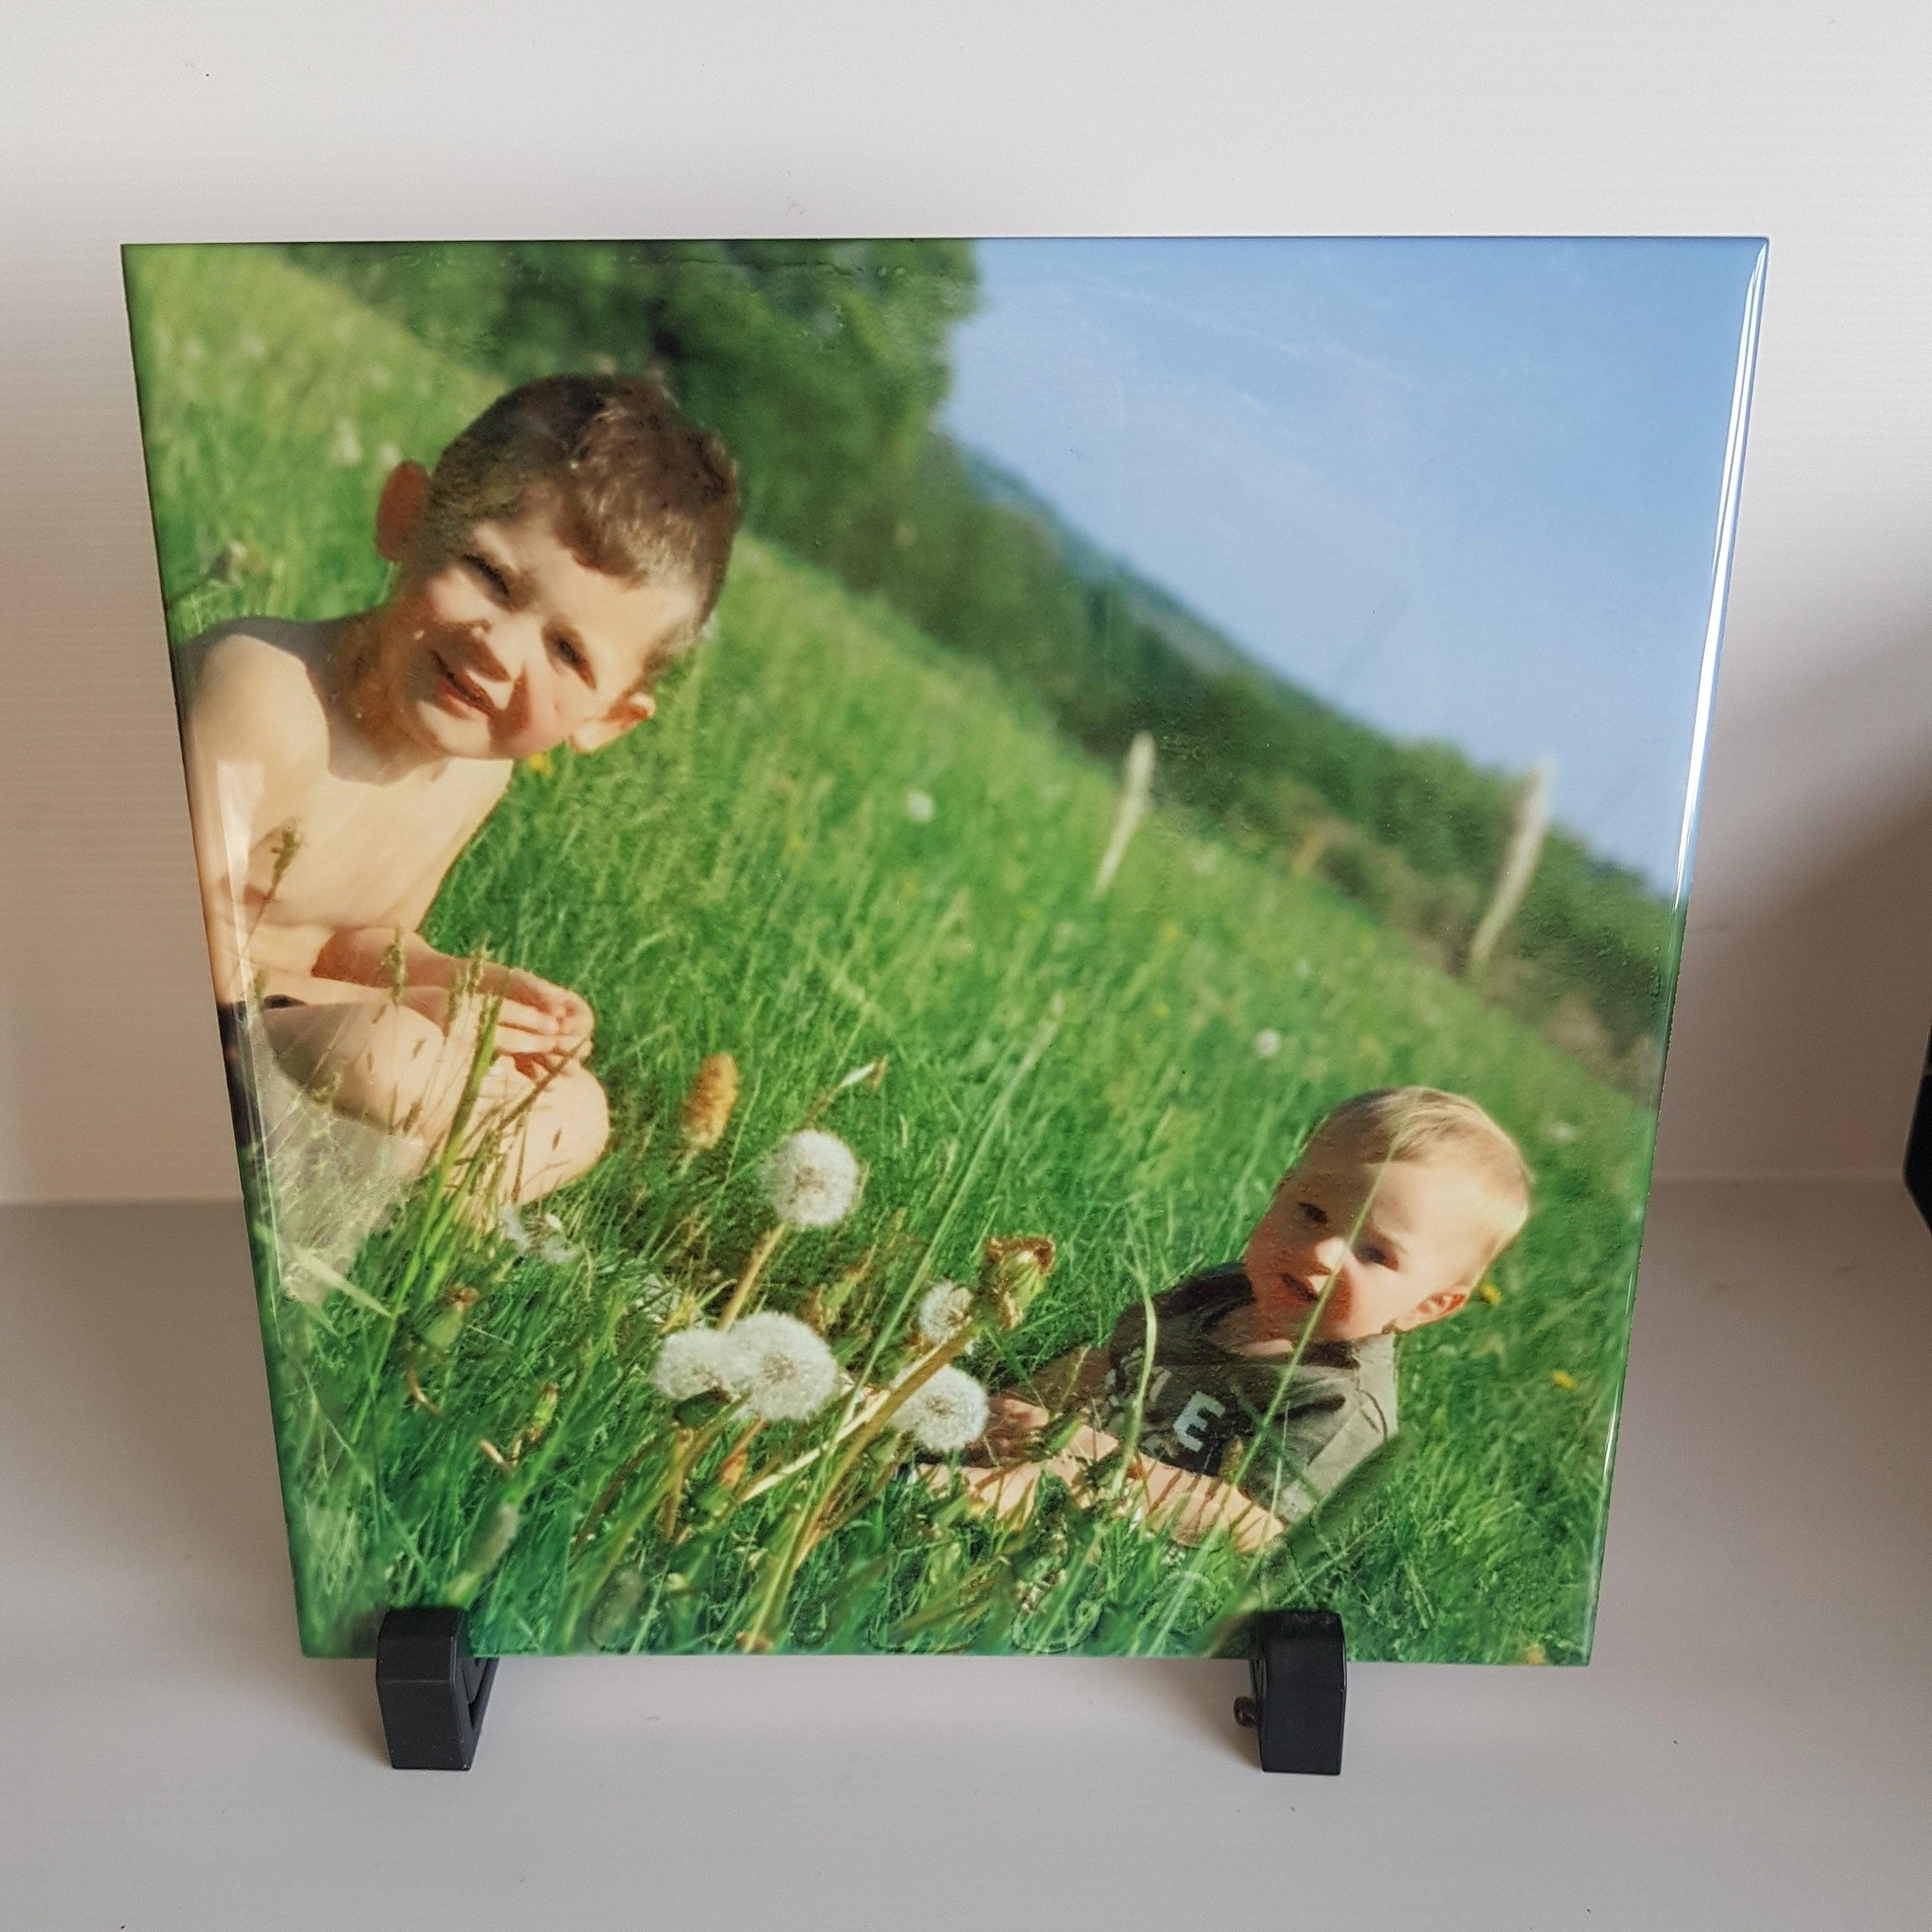 Fathers Day gift for Dad -Personalised Photo Ceramic Tile 8"- Photo Tile -Personalised Photo Gift-For Dad- Gift from Son -Gift from Daughter